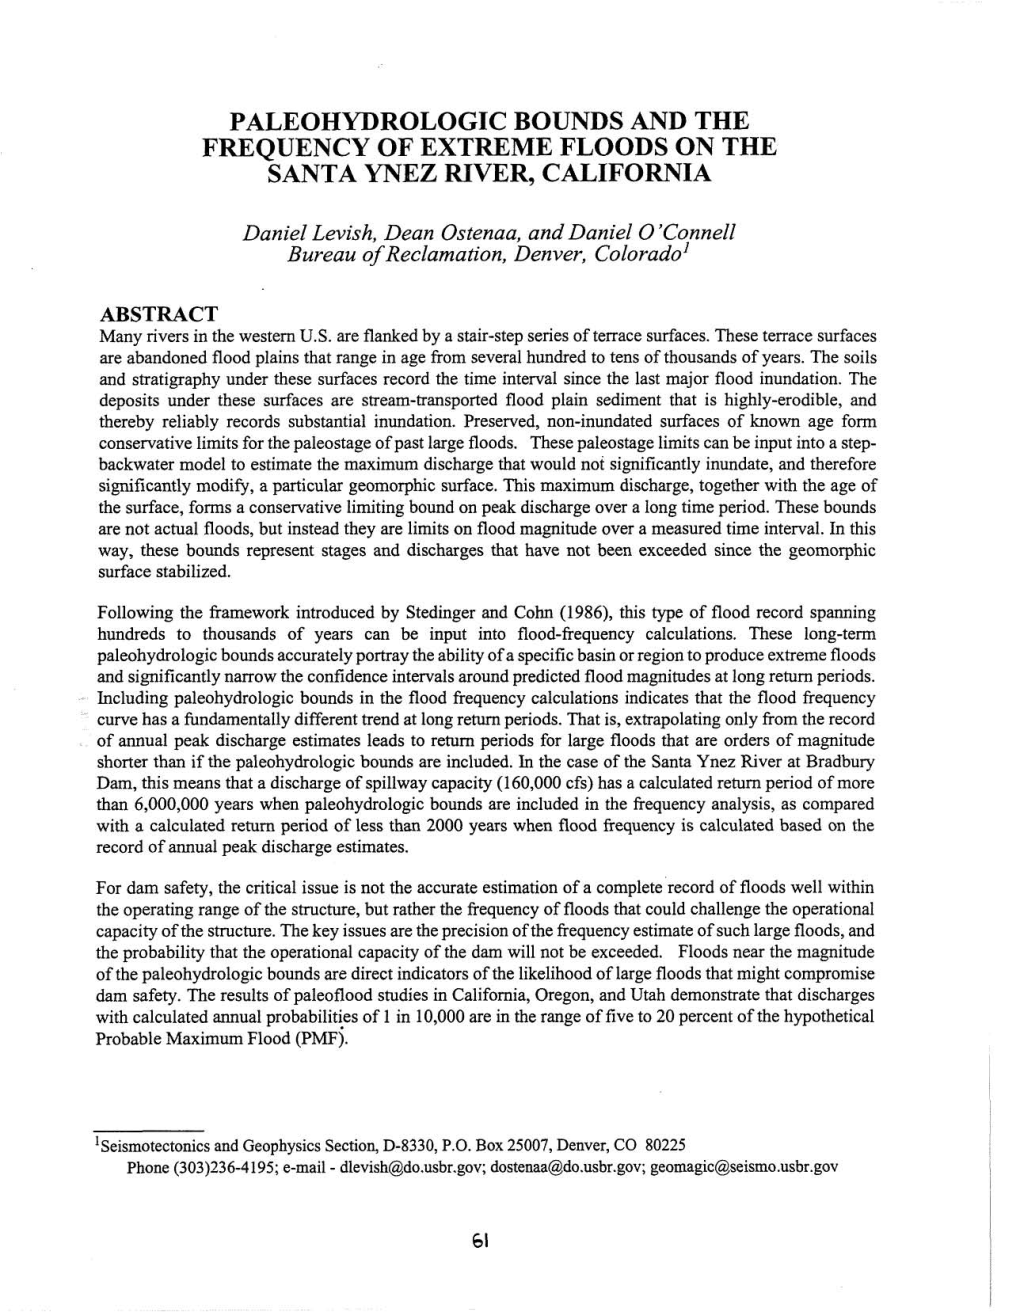 Paleohydrologic Bounds and the Frequency of Extreme Floods on the Santa Ynez River, California